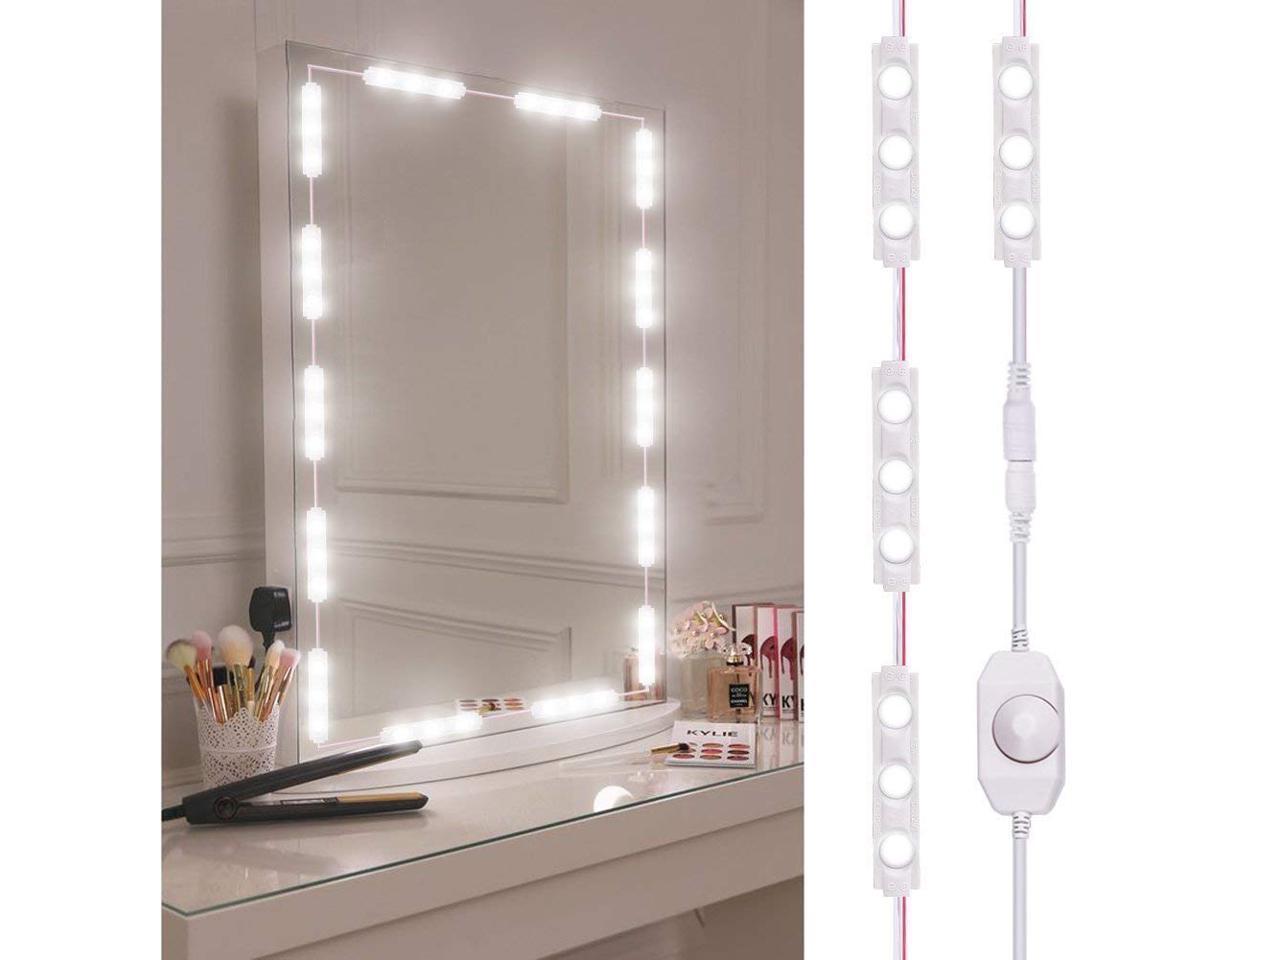 Vanity Mirror Light,Portable LED Mirror Light,Touch Control/USB Rechargeable,for Bathroom Dressing Table Mirror Lighting